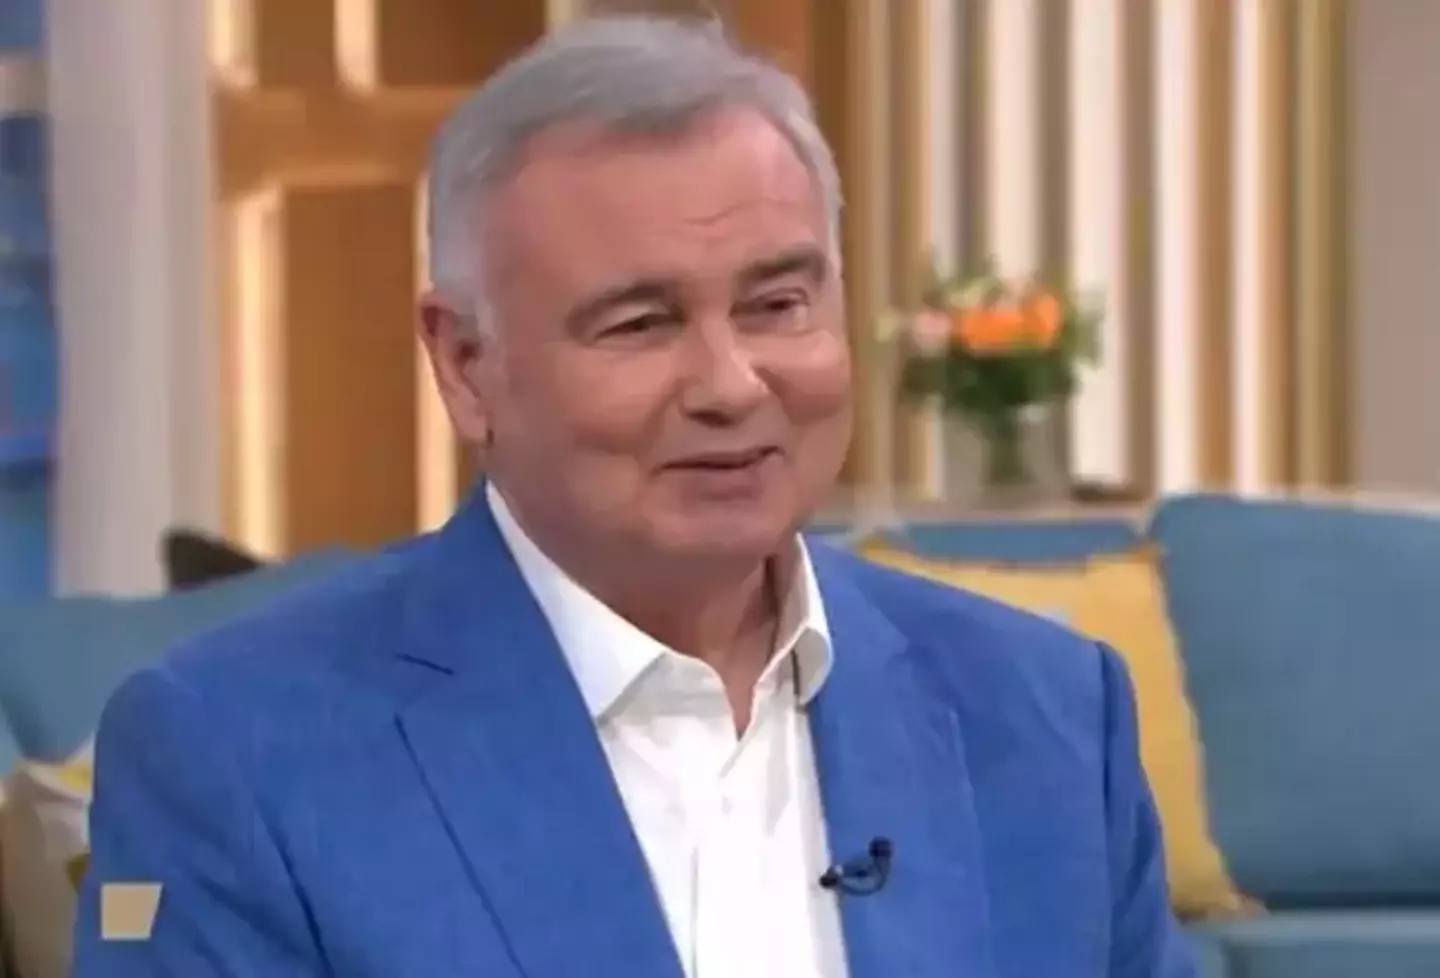 Eamonn Holmes used to present This Morning and tore into the wording of Schofield's departure from the show.